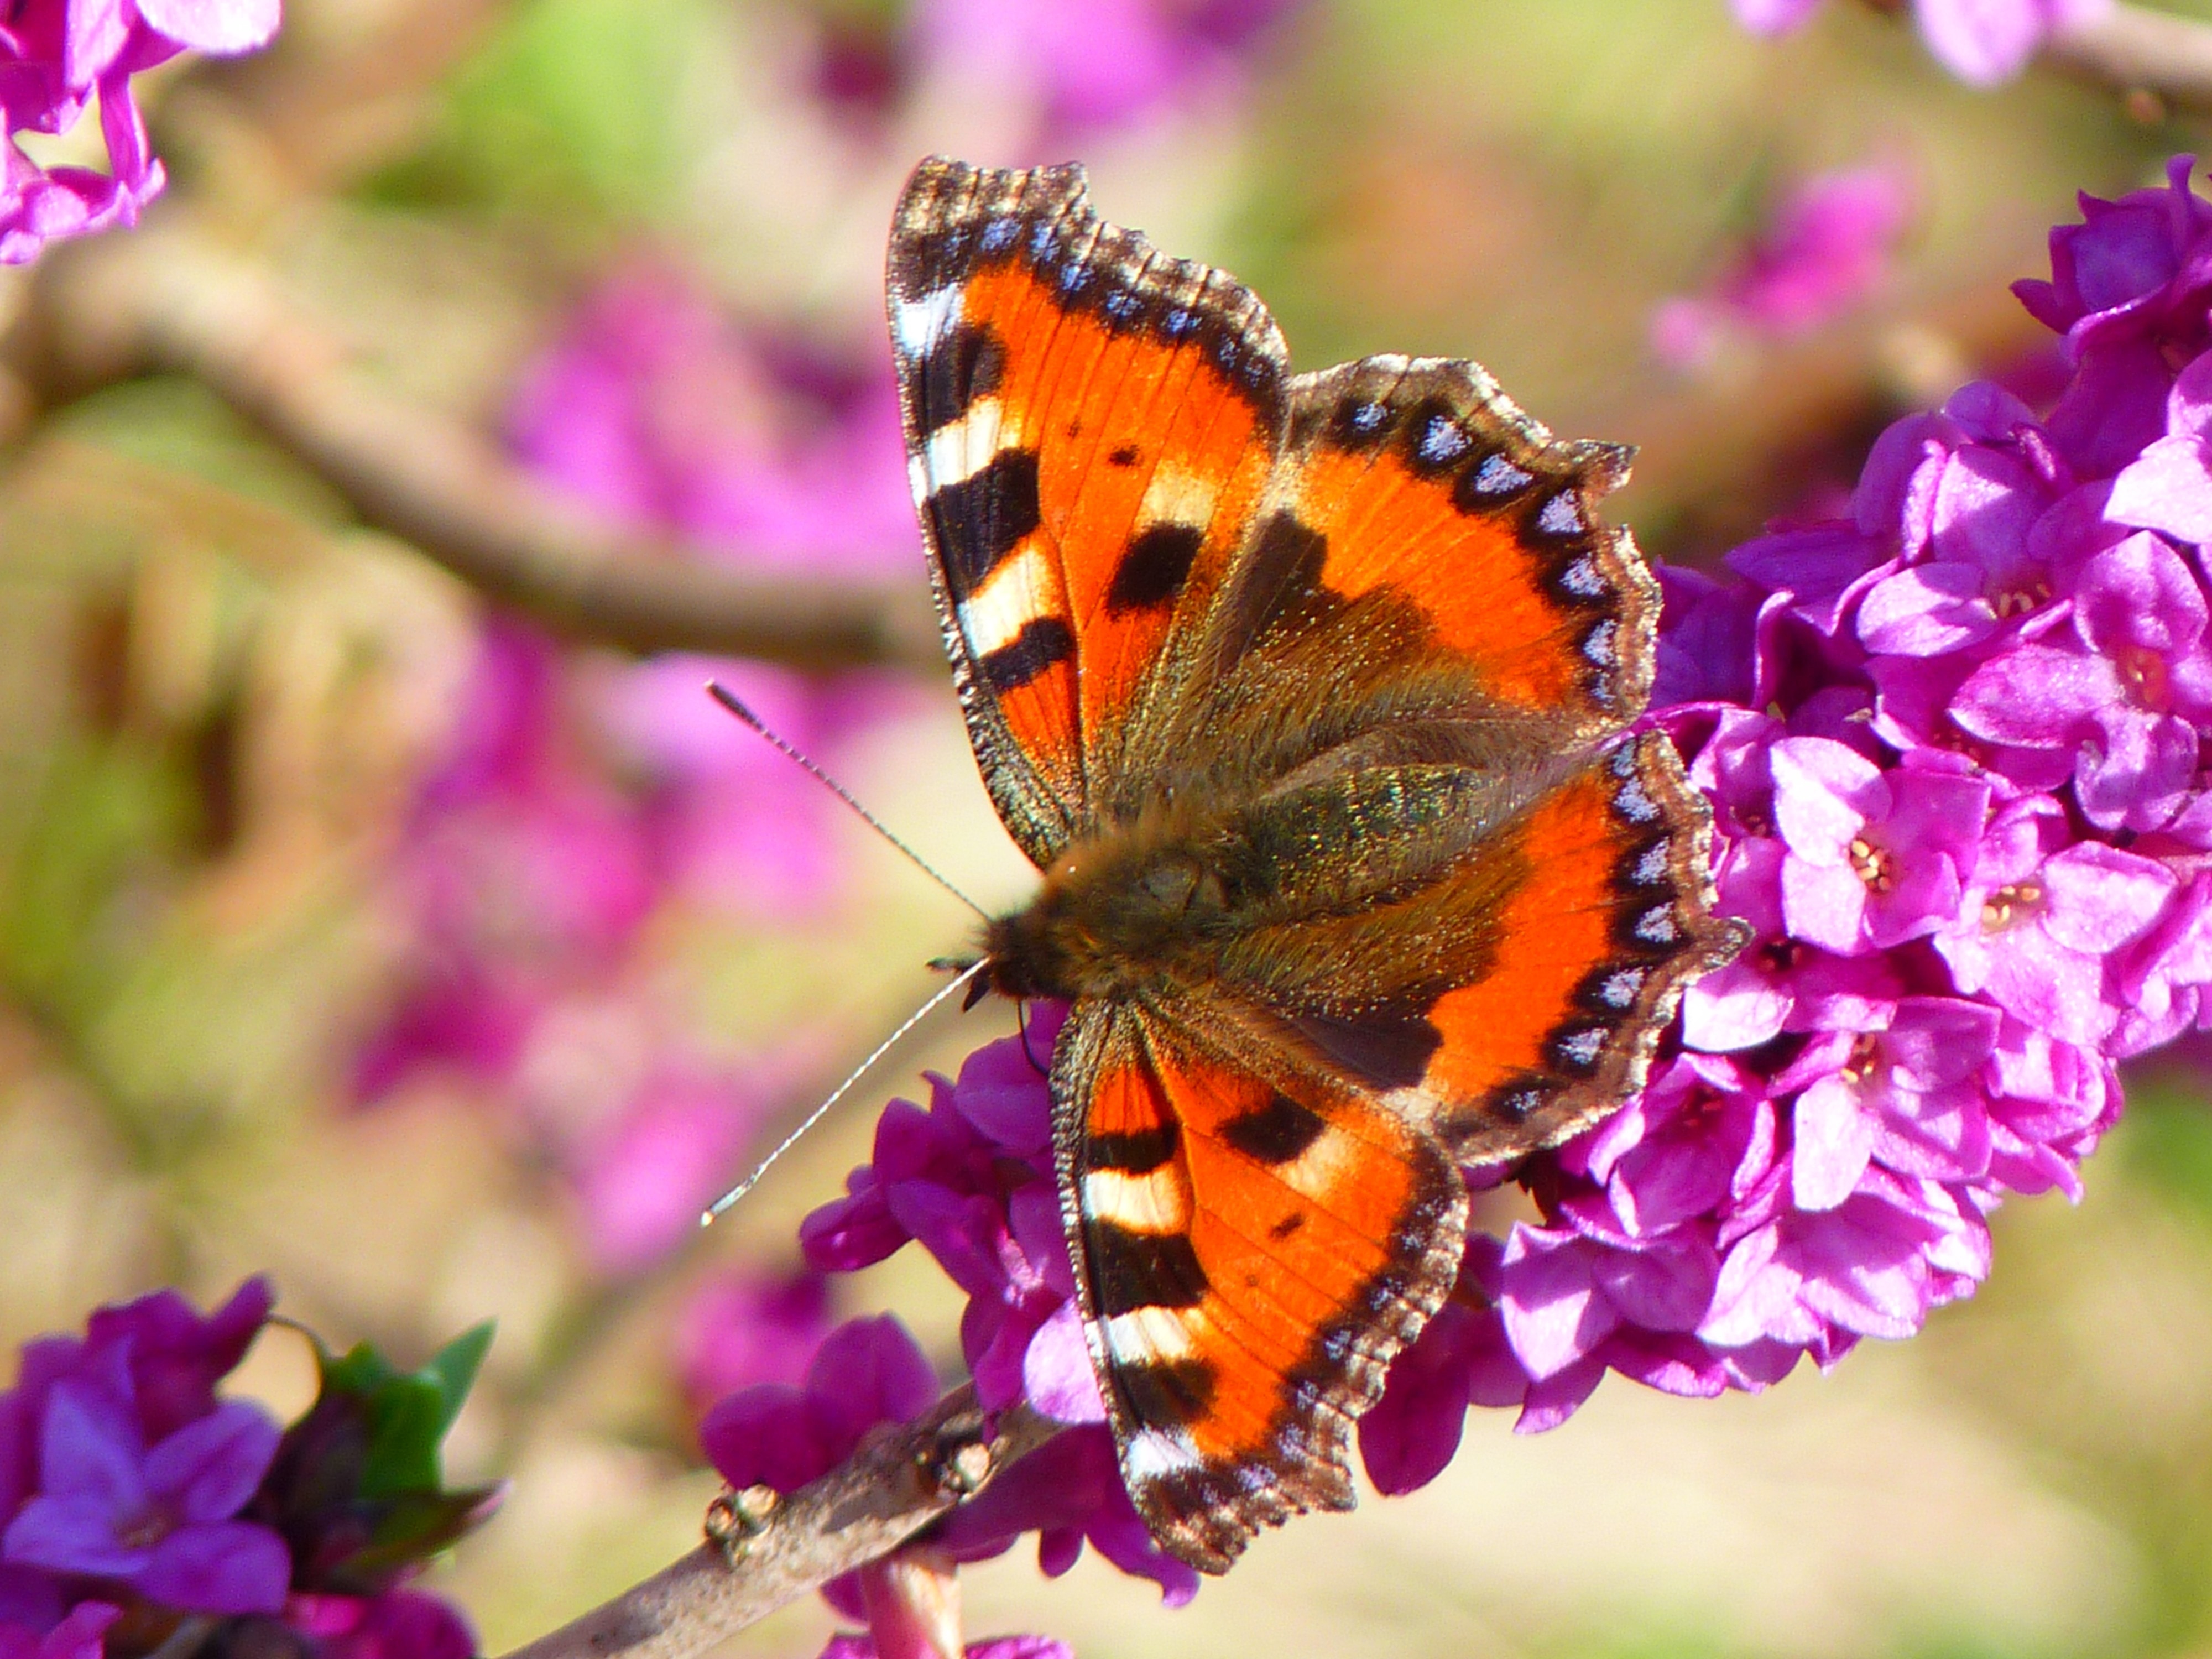 tortoiseshell butterfly perched on pink petaled flowers in closeup photo